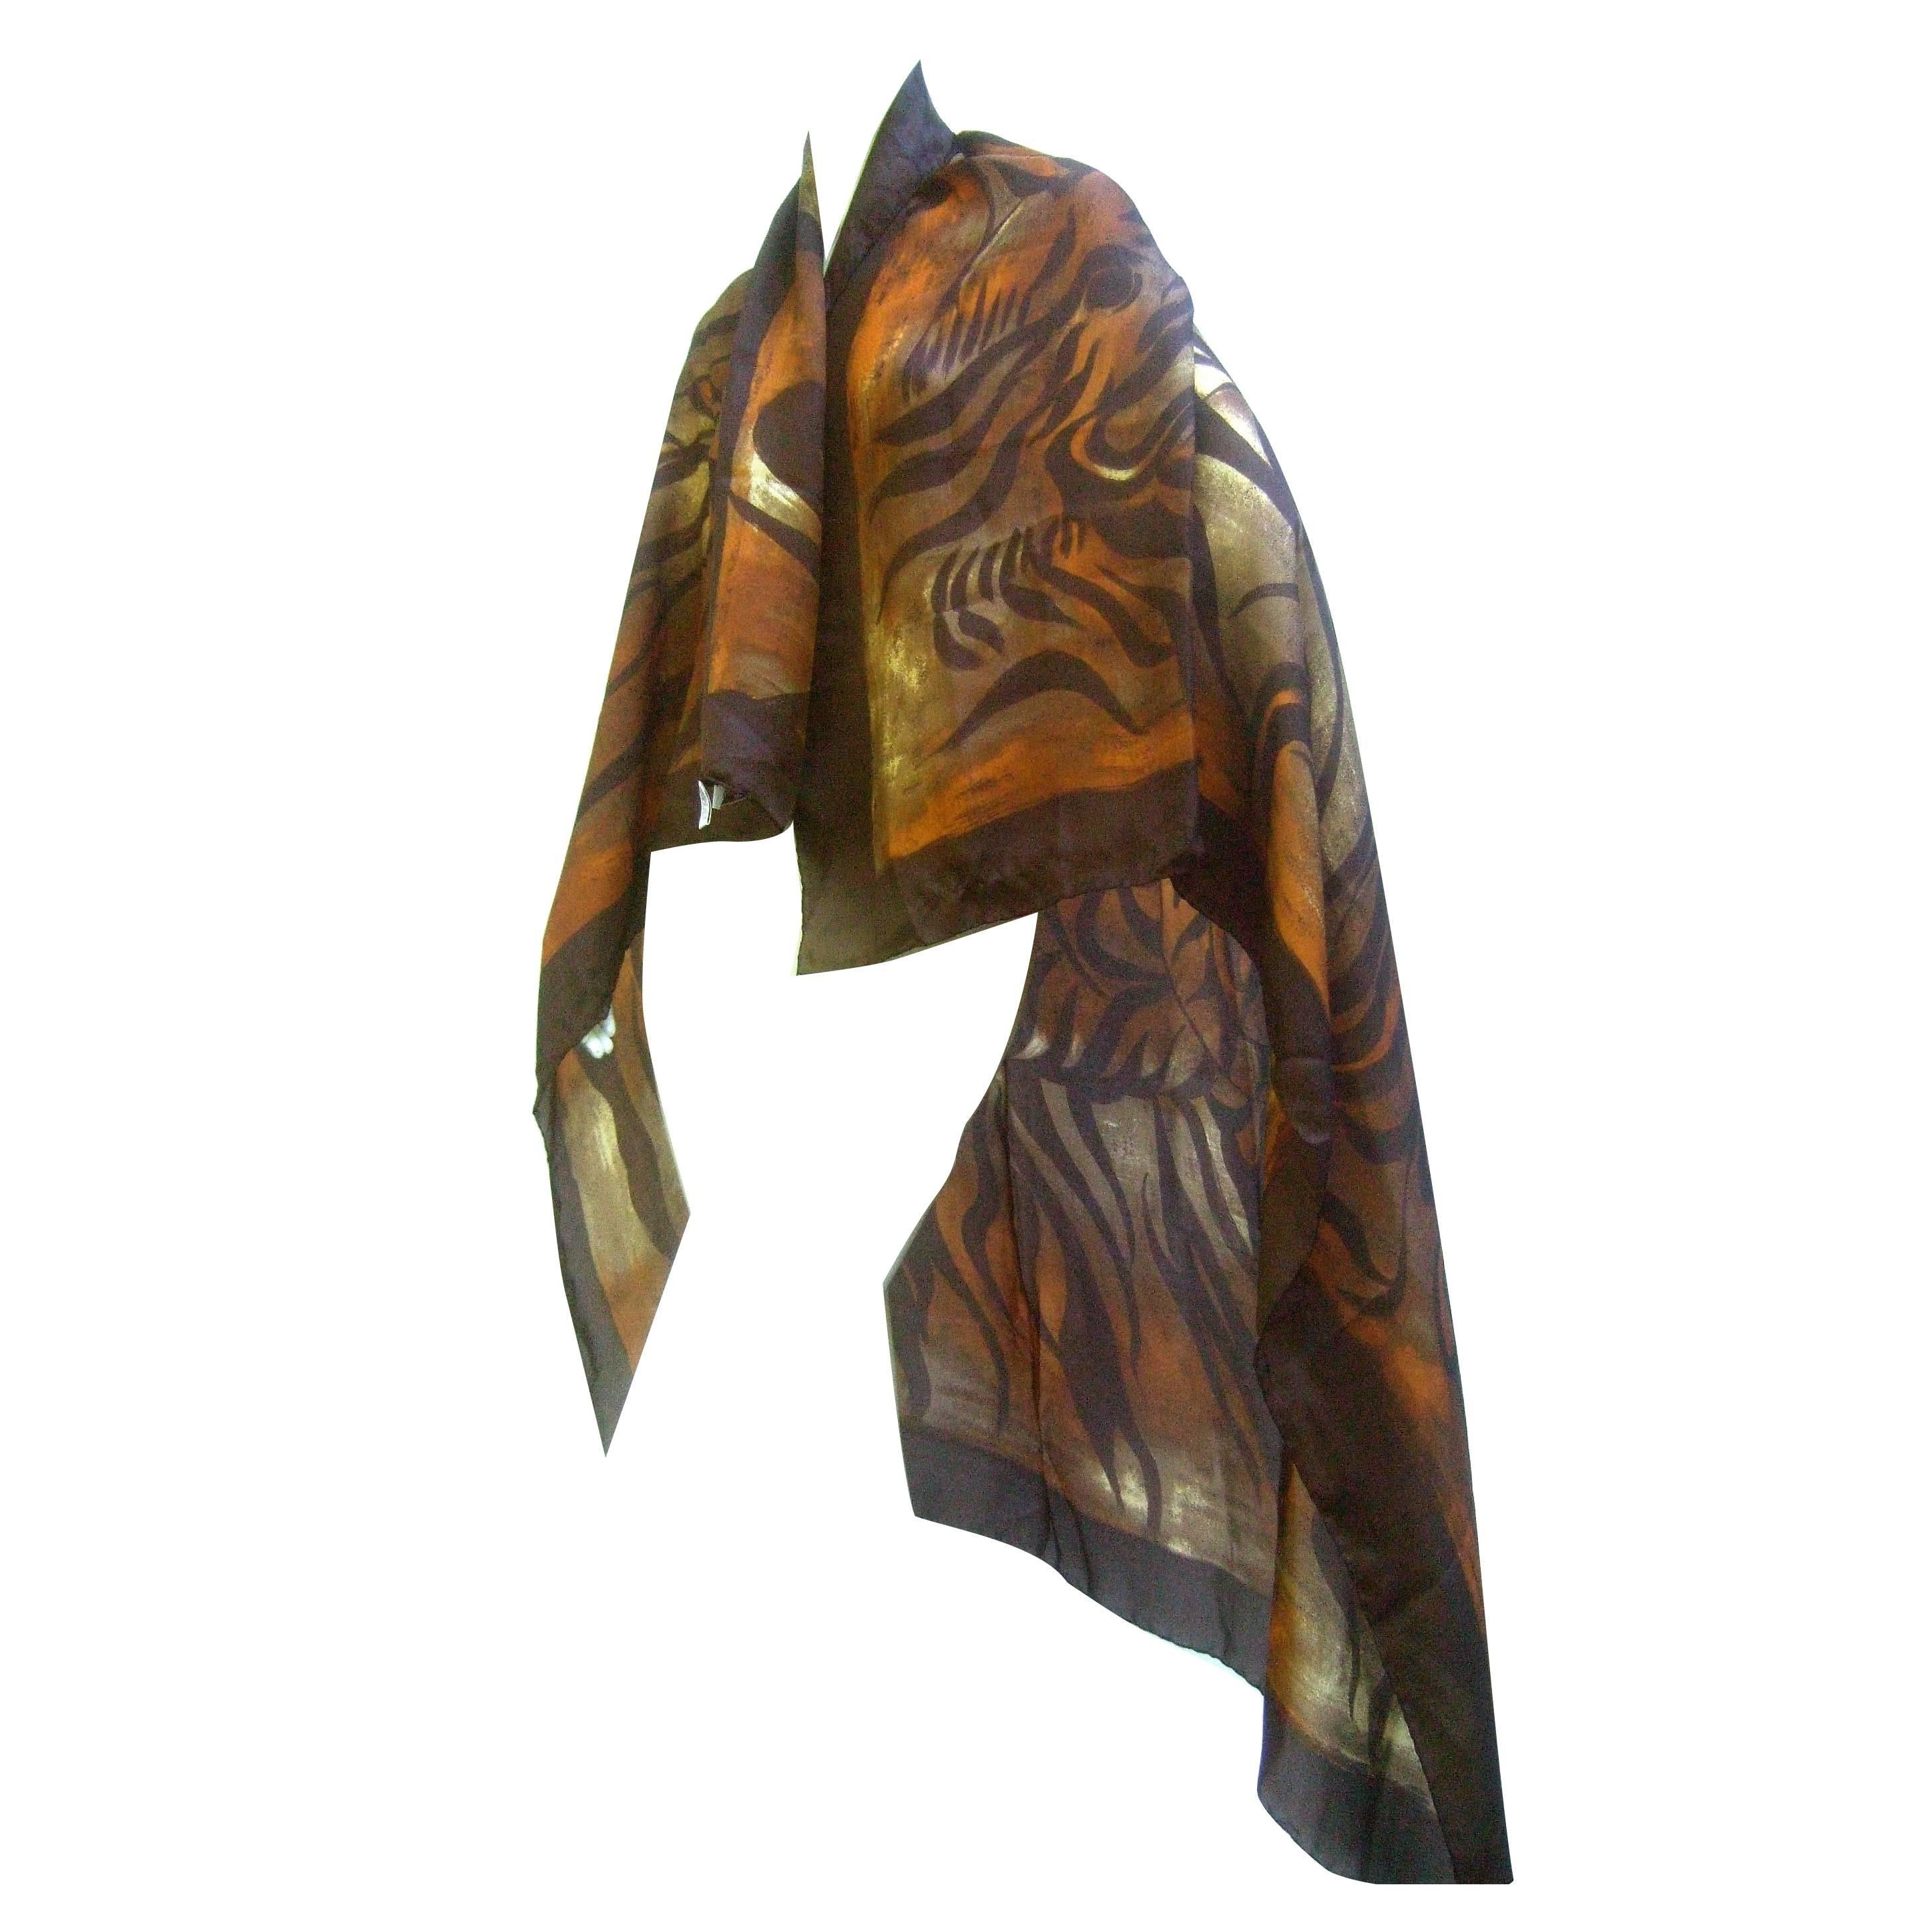 Saint Laurent Rive Gauche Massive silk jungle print shawl wrap 53" x 53" 
The exotic jungle print huge scale shawl - scarf is illustrated with 
a sinuous tiger lurking in a lush tropical background 

The luxurious shawl - scarf is a